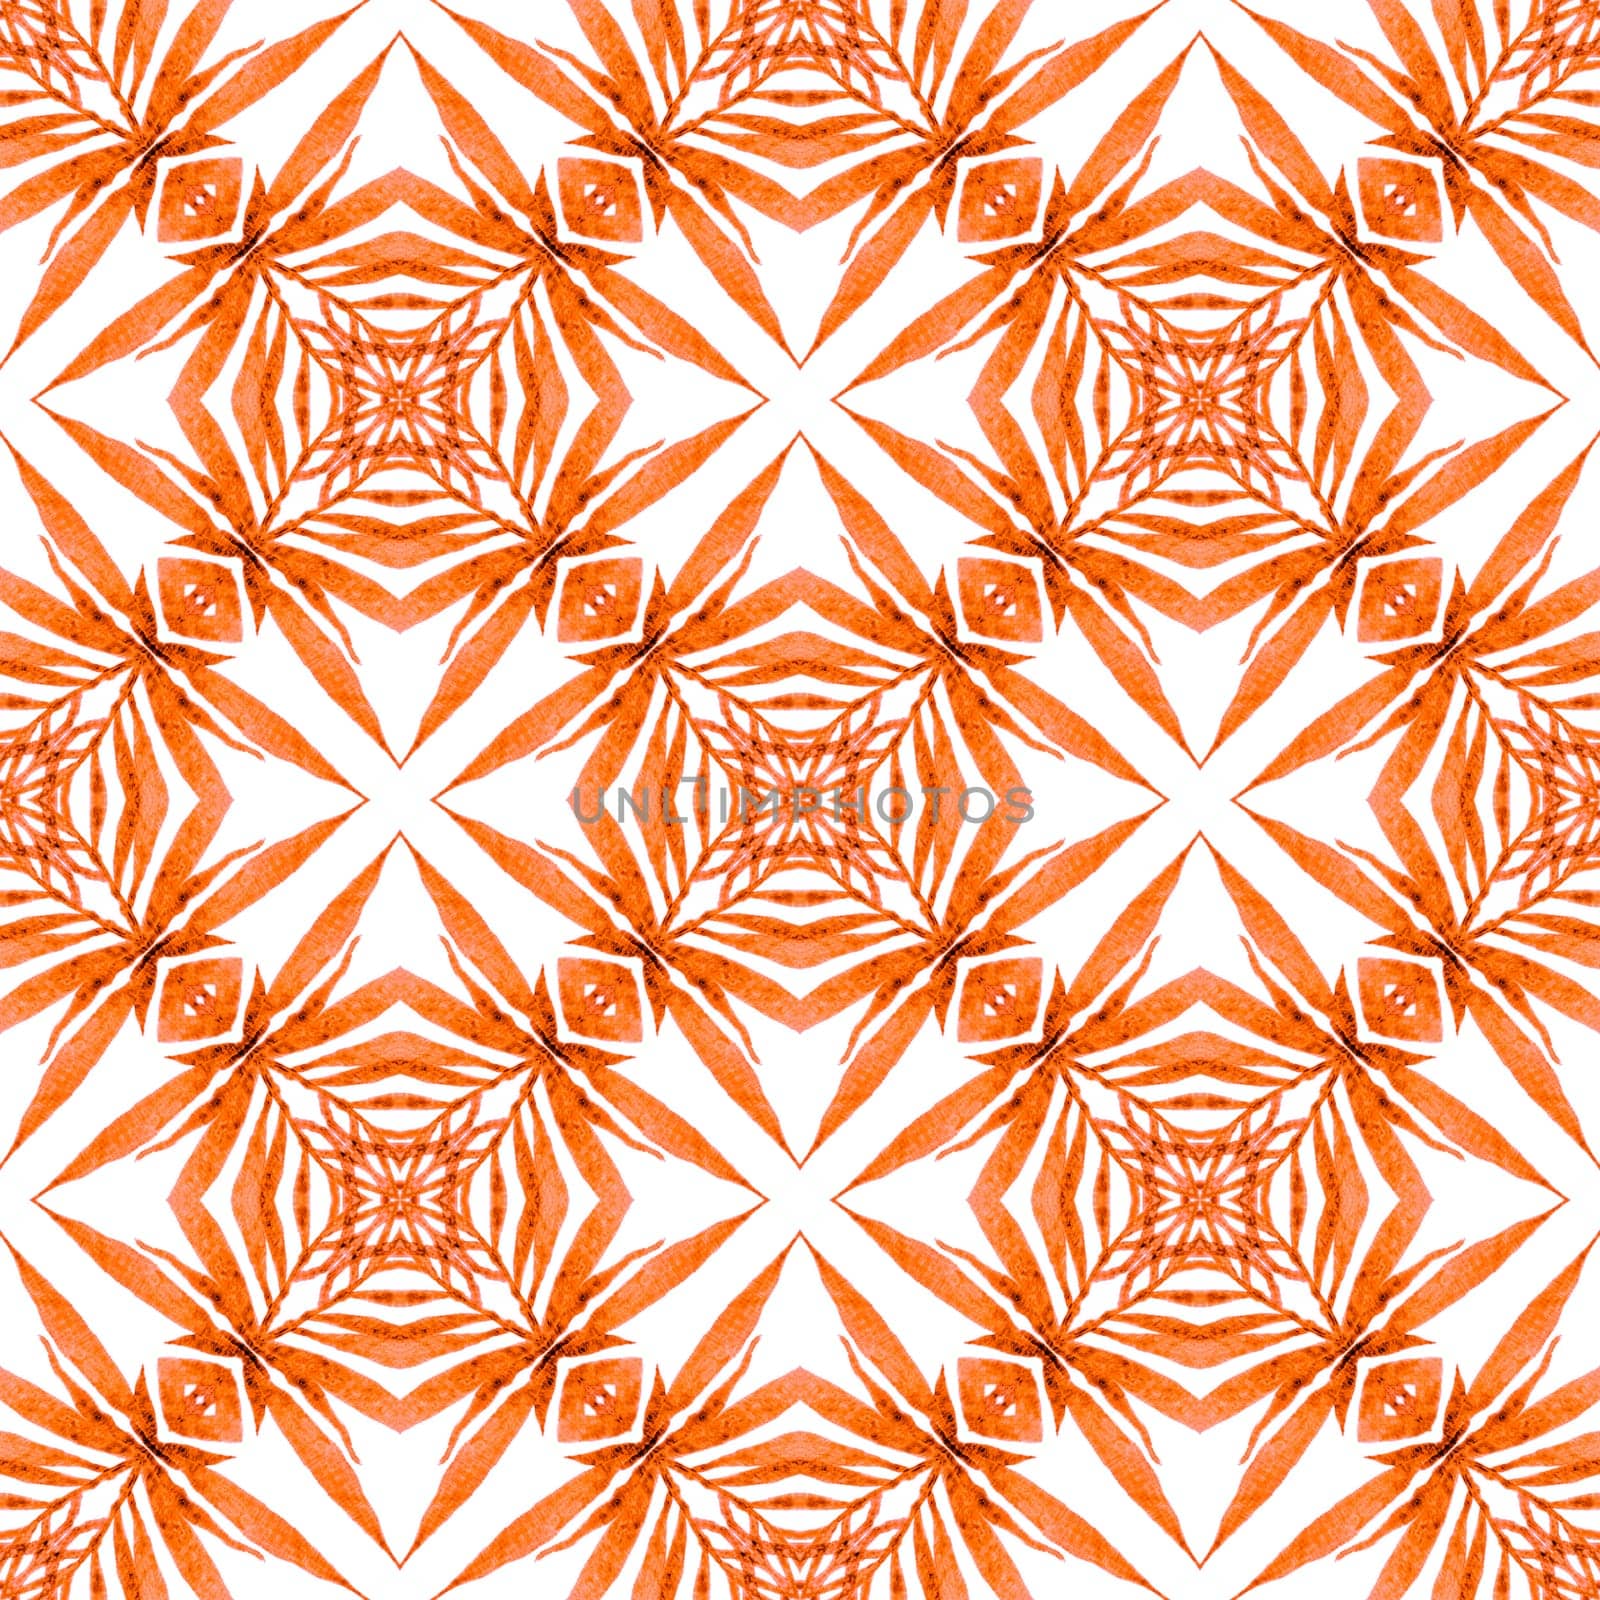 Textile ready outstanding print, swimwear fabric, wallpaper, wrapping. Orange classic boho chic summer design. Repeating striped hand drawn border. Striped hand drawn design.